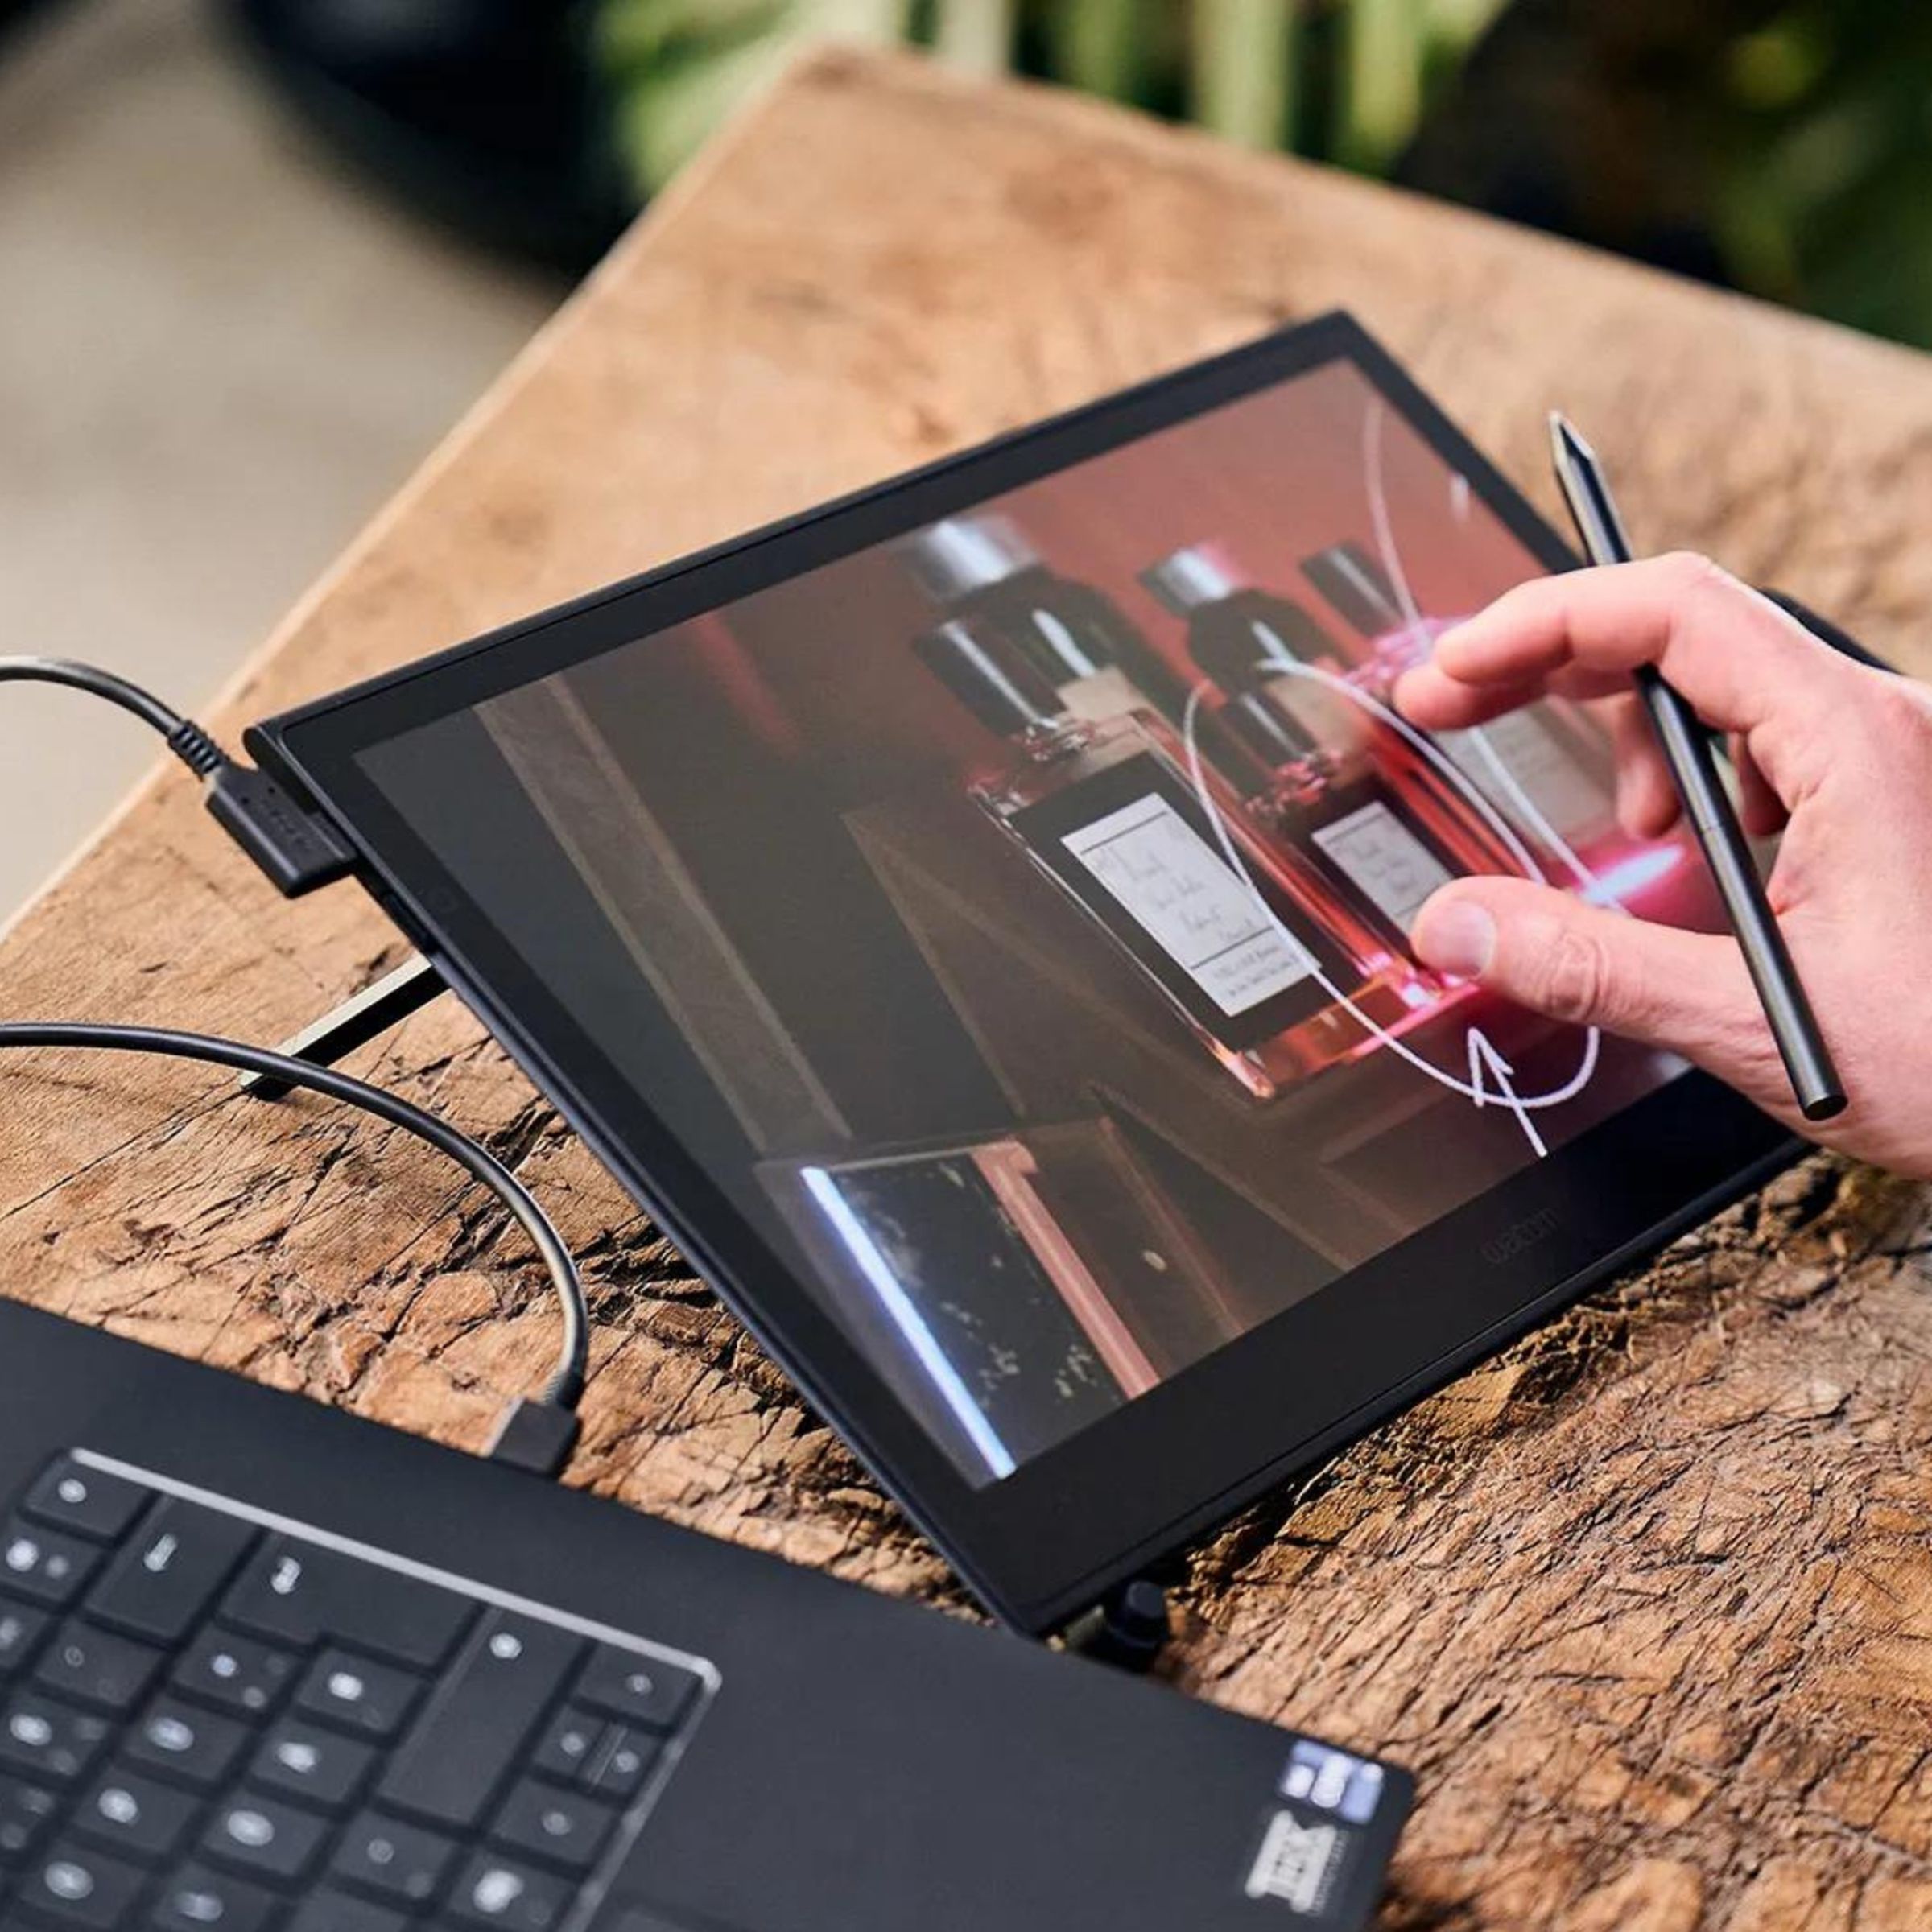 Someone using the Wacom Movink 13 display drawing tablet with a connected laptop.